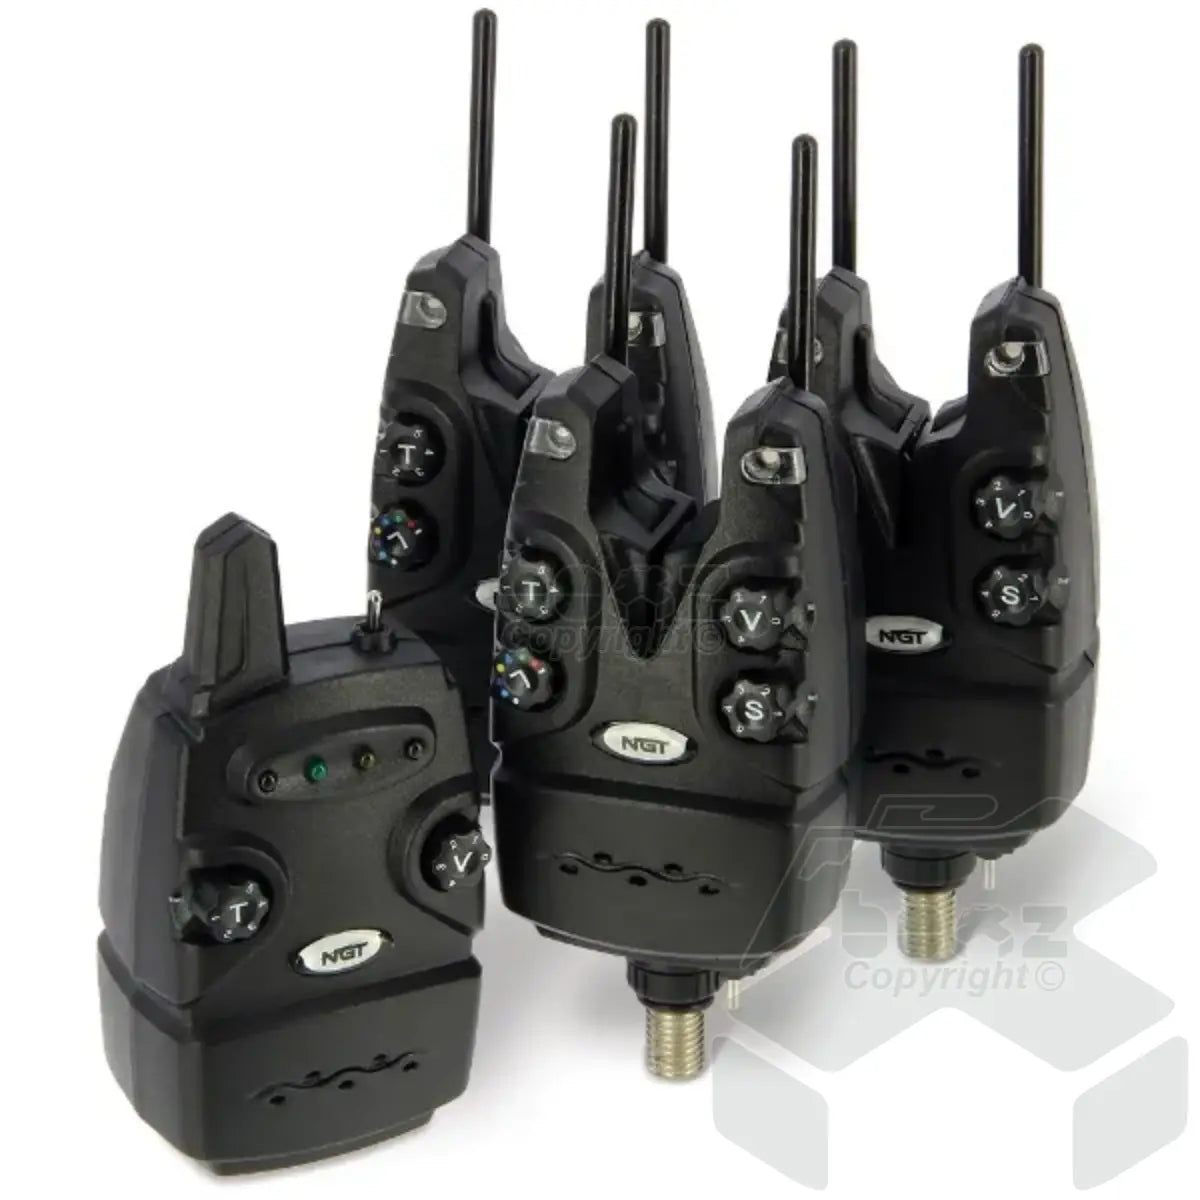 NGT NGT Dynamic 3pc Wireless Alarms - Adjustable Volume, Tone, Sensitivity and light with Receiver